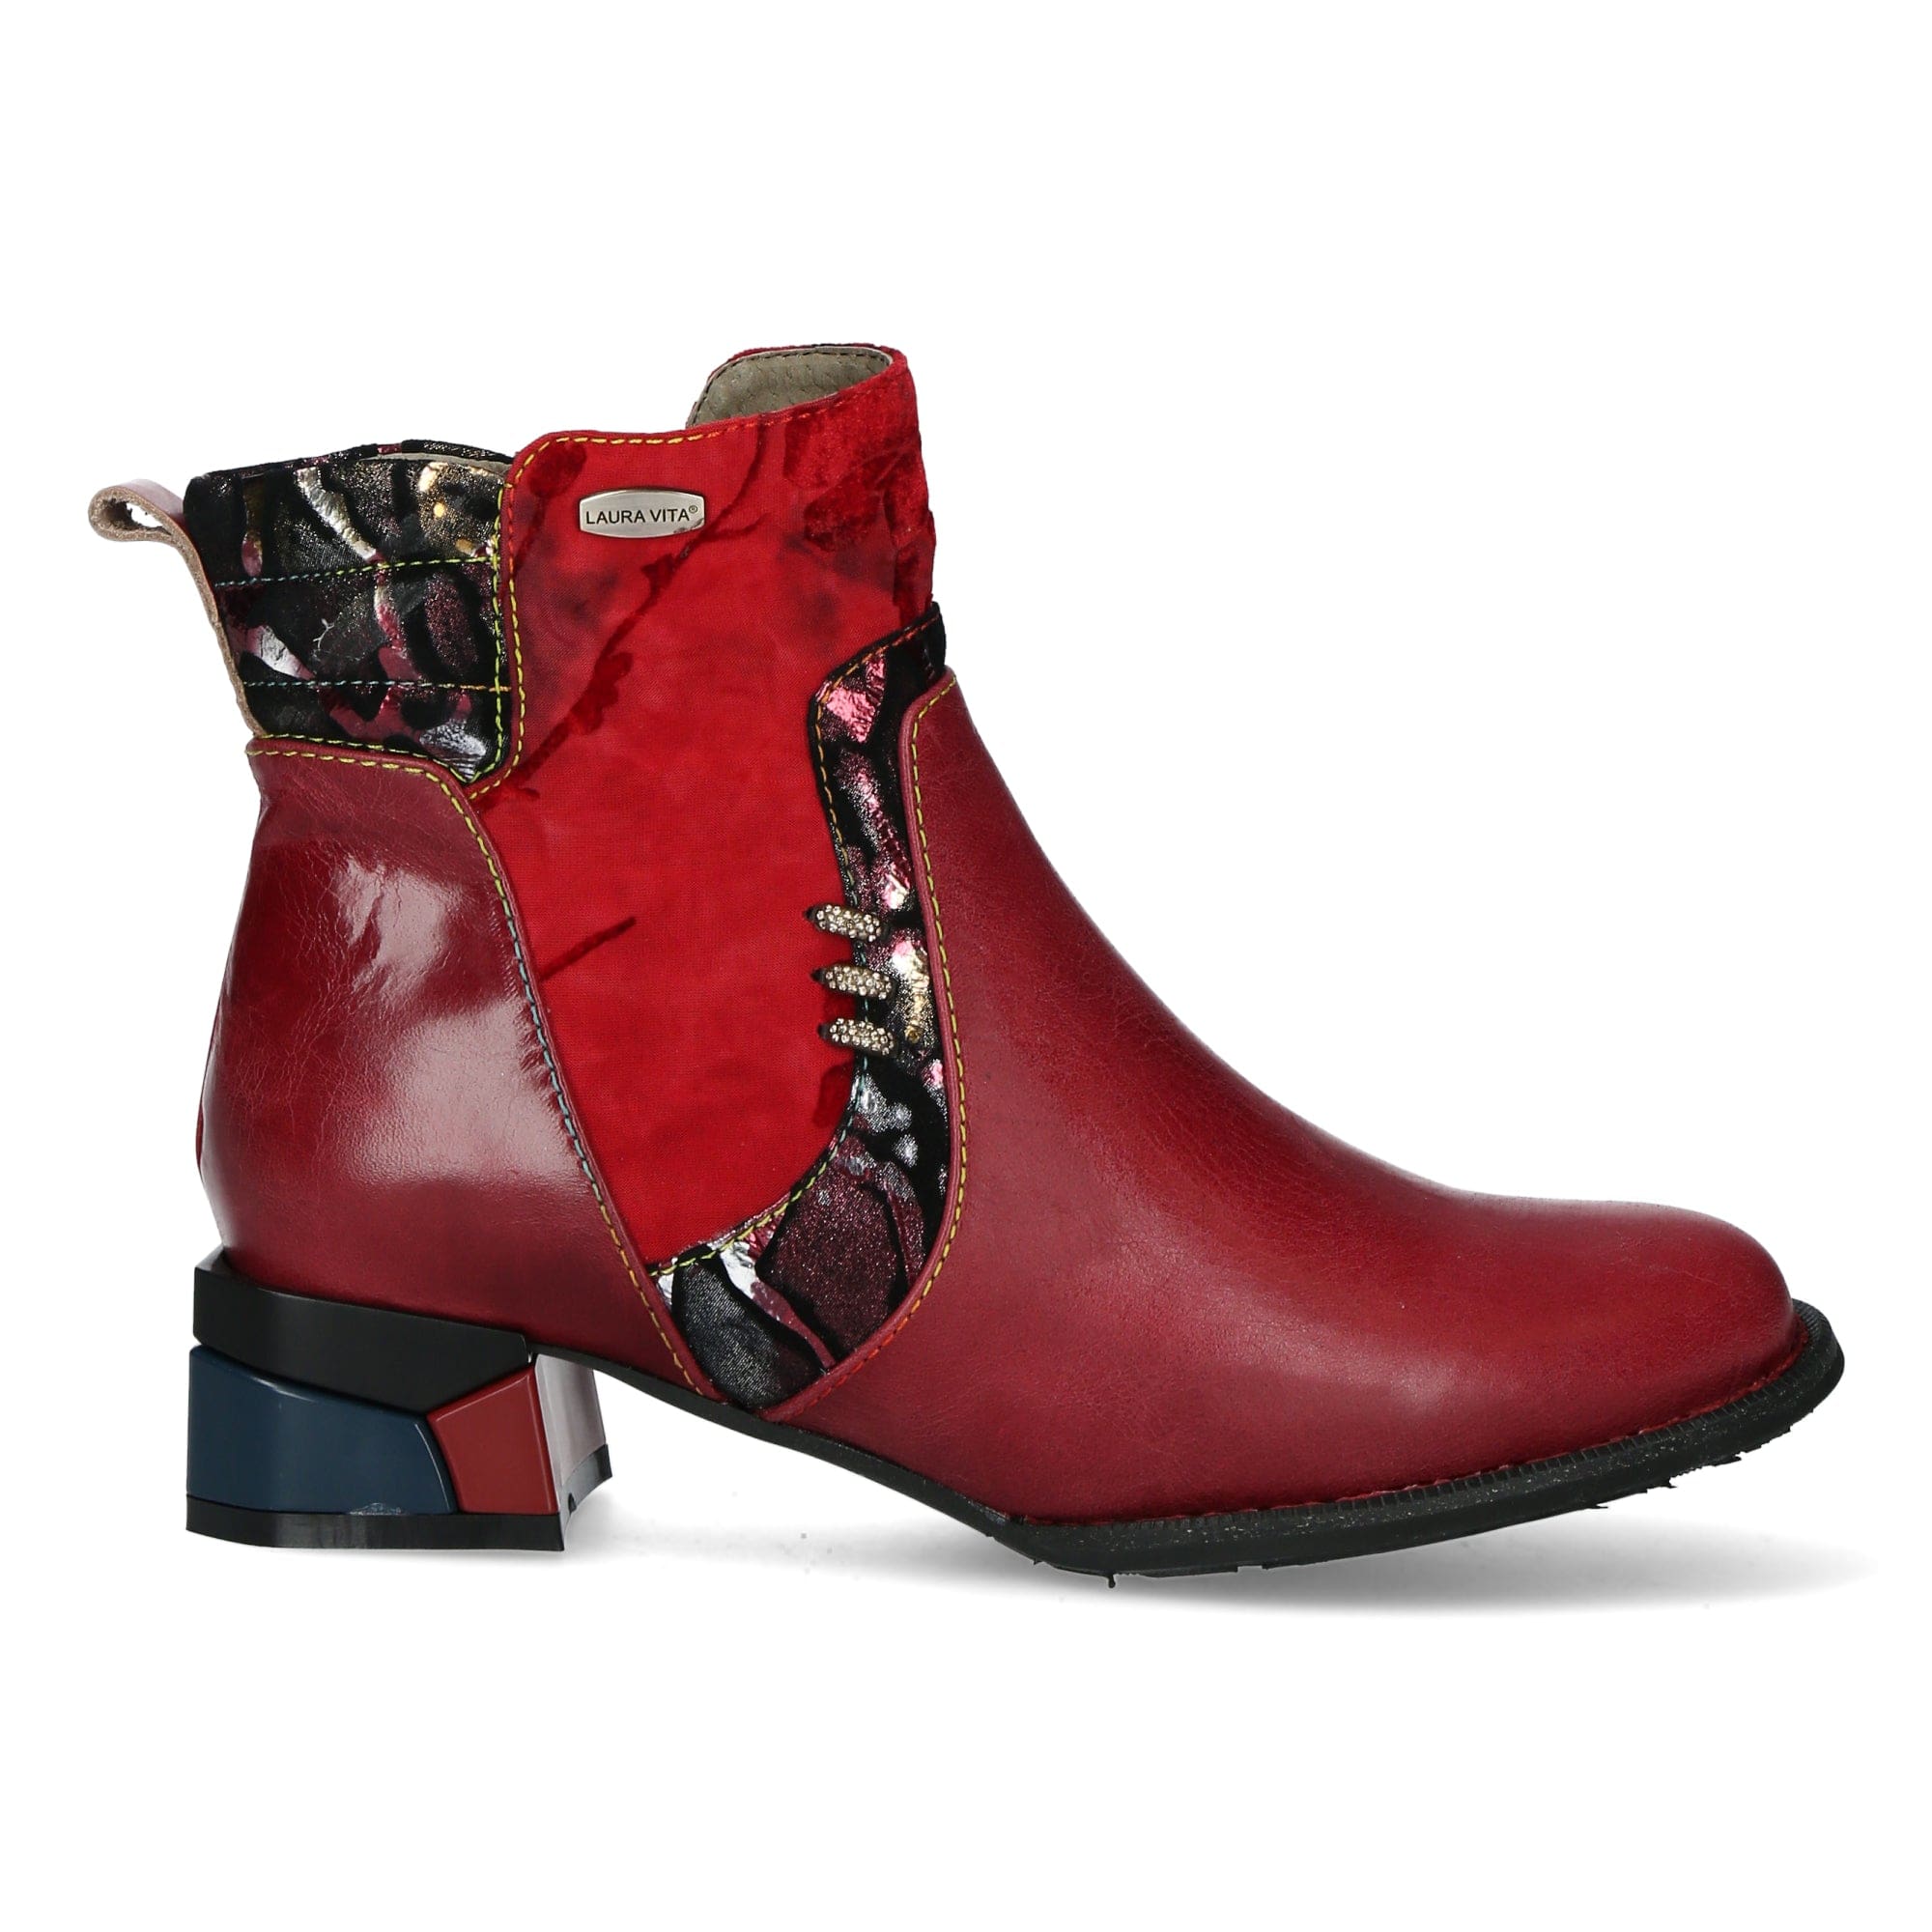 Chaussure IGCOO 25 - 35 / Rouge - Boots